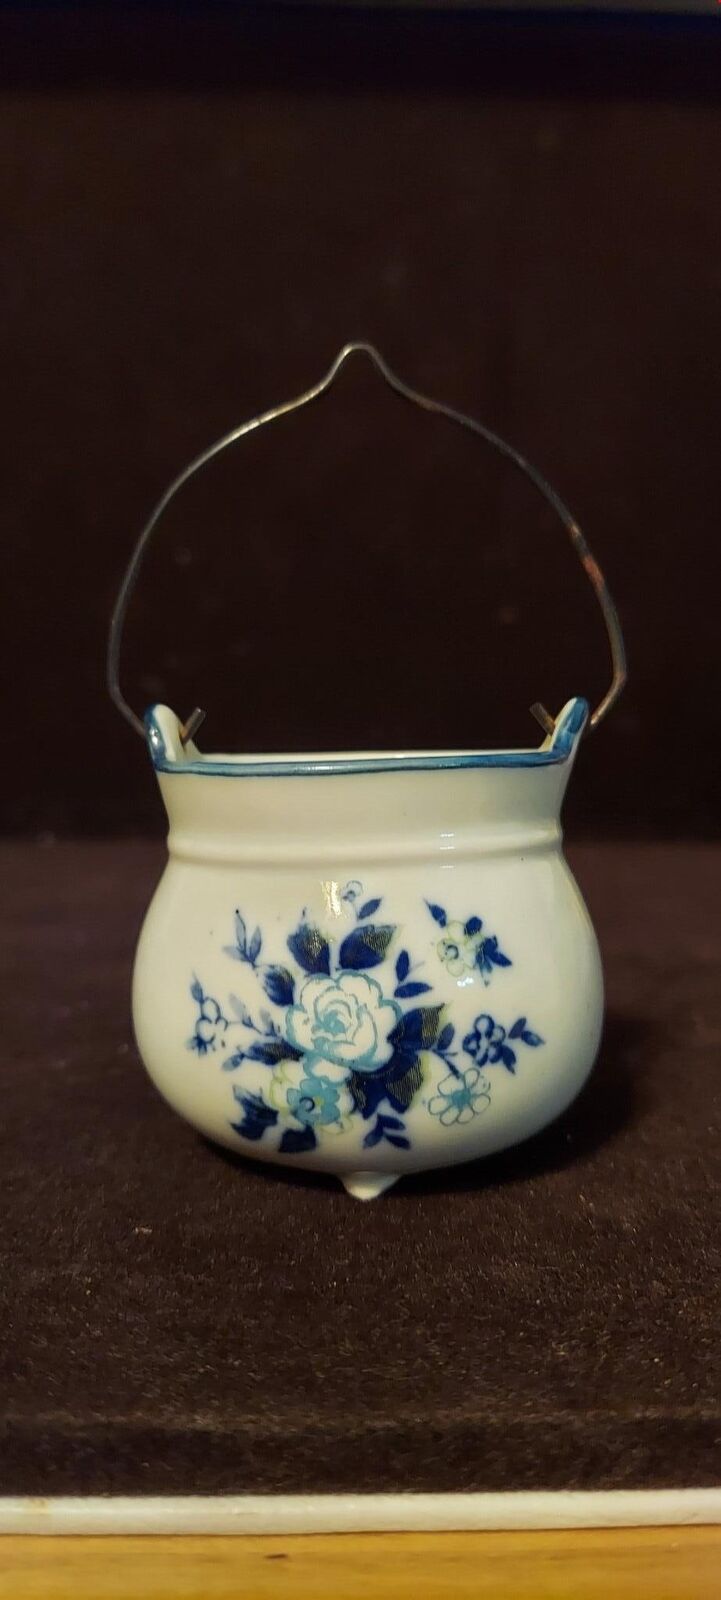 Small Vintage Porcelain Blue White Floral Pot With Wire Handle 2 1/4" Tall